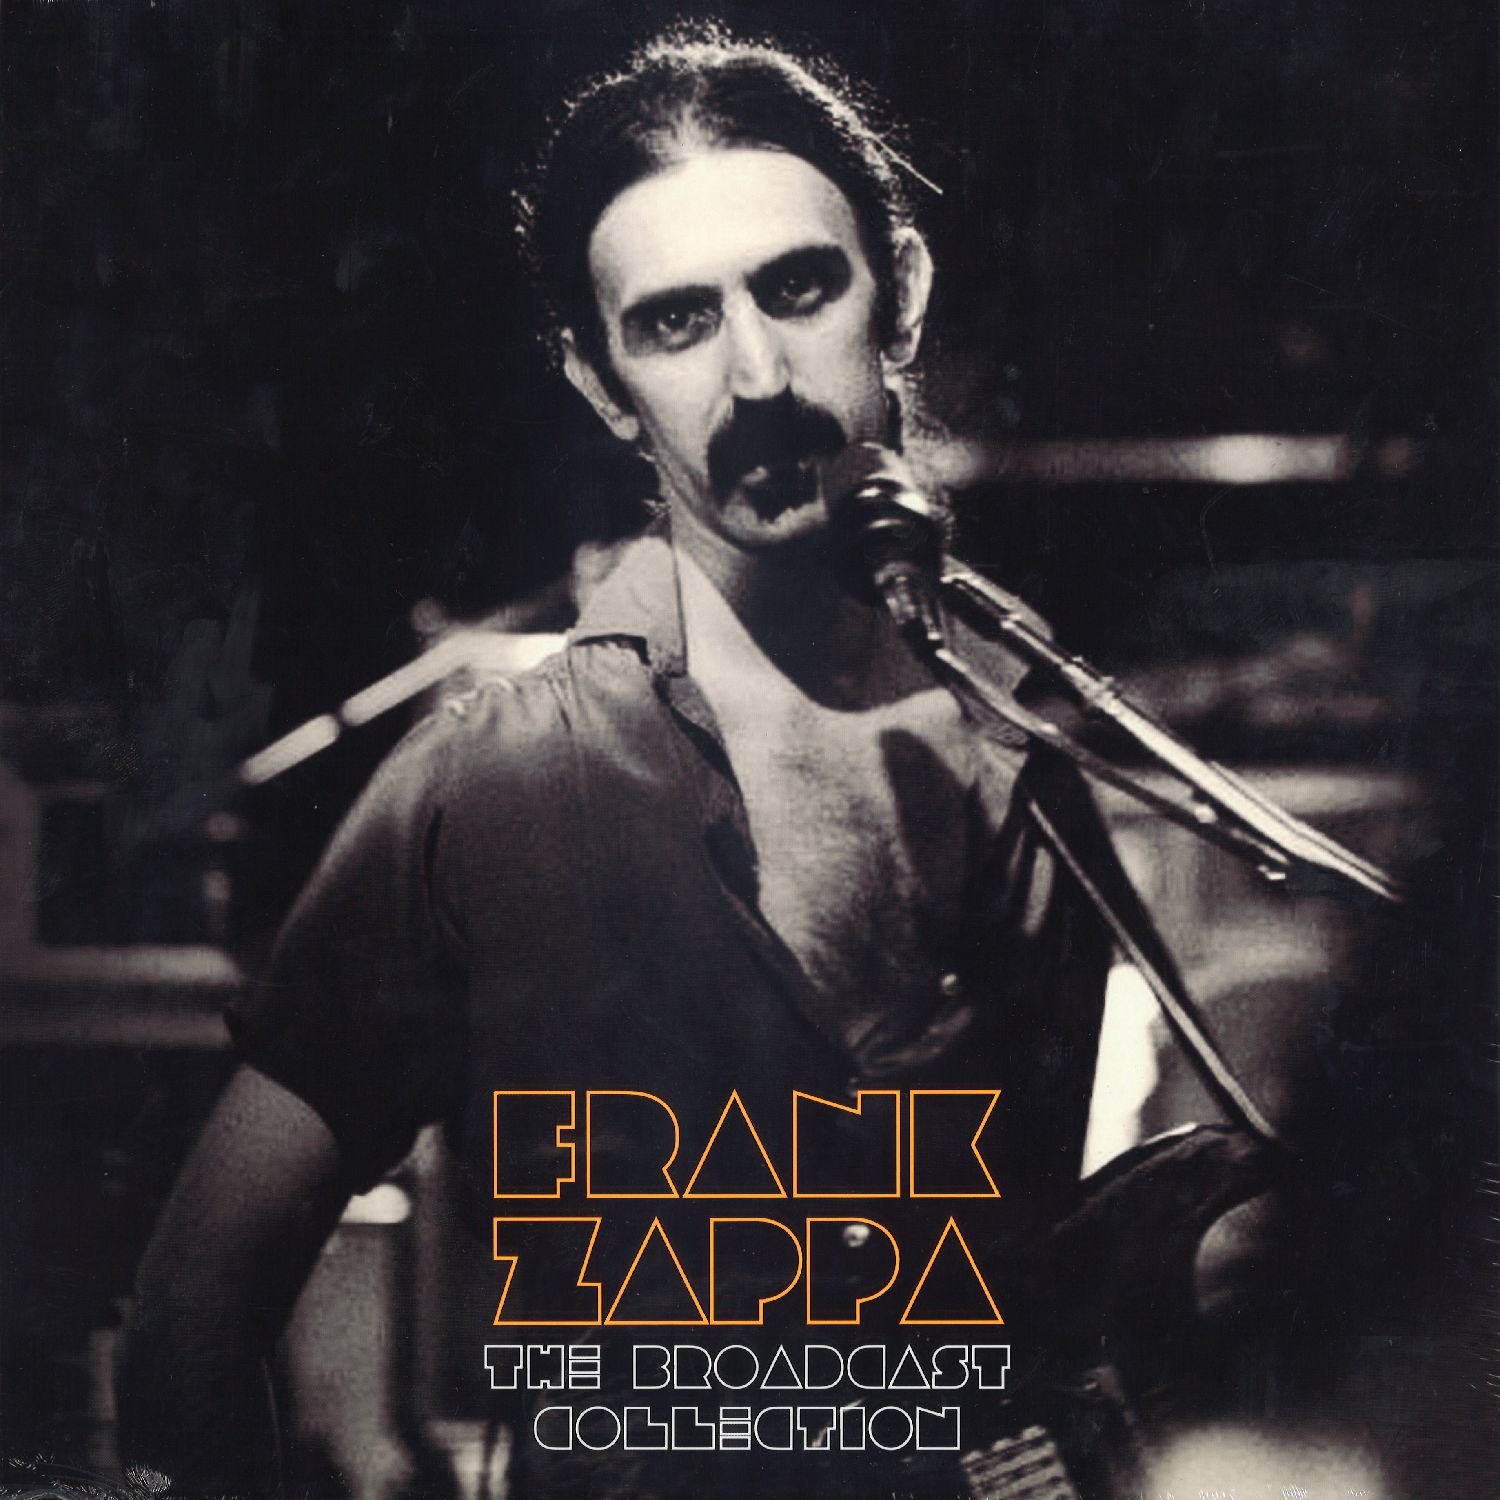 FRANK ZAPPA (& THE MOTHERS OF INVENTION) / フランク・ザッパ / THE BROADCAST COLLECTION (3LP BOX)